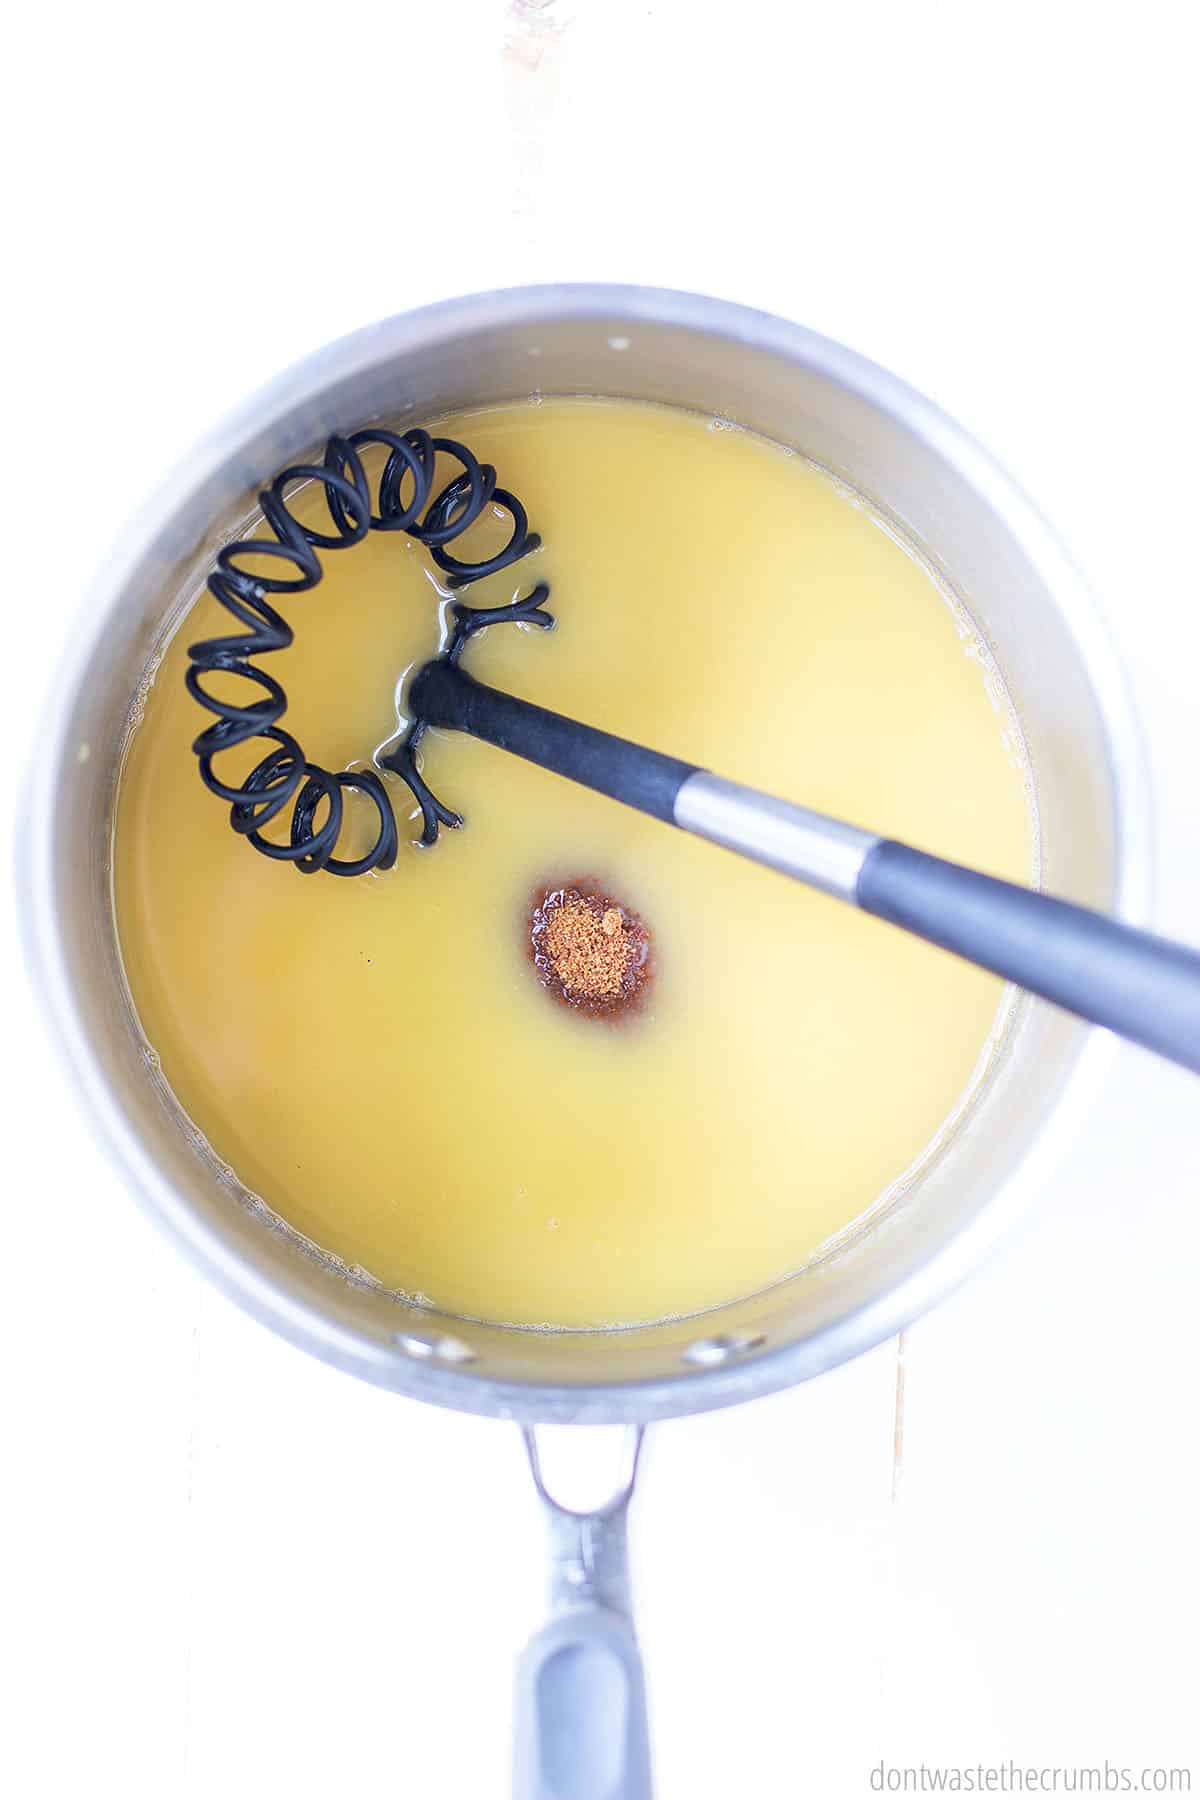 A saucepan with a whisk inside ready to mix up the base (pineapple juice, vinegar, soy sauce and brown sugar) of a sweet and sour sauce recipe.